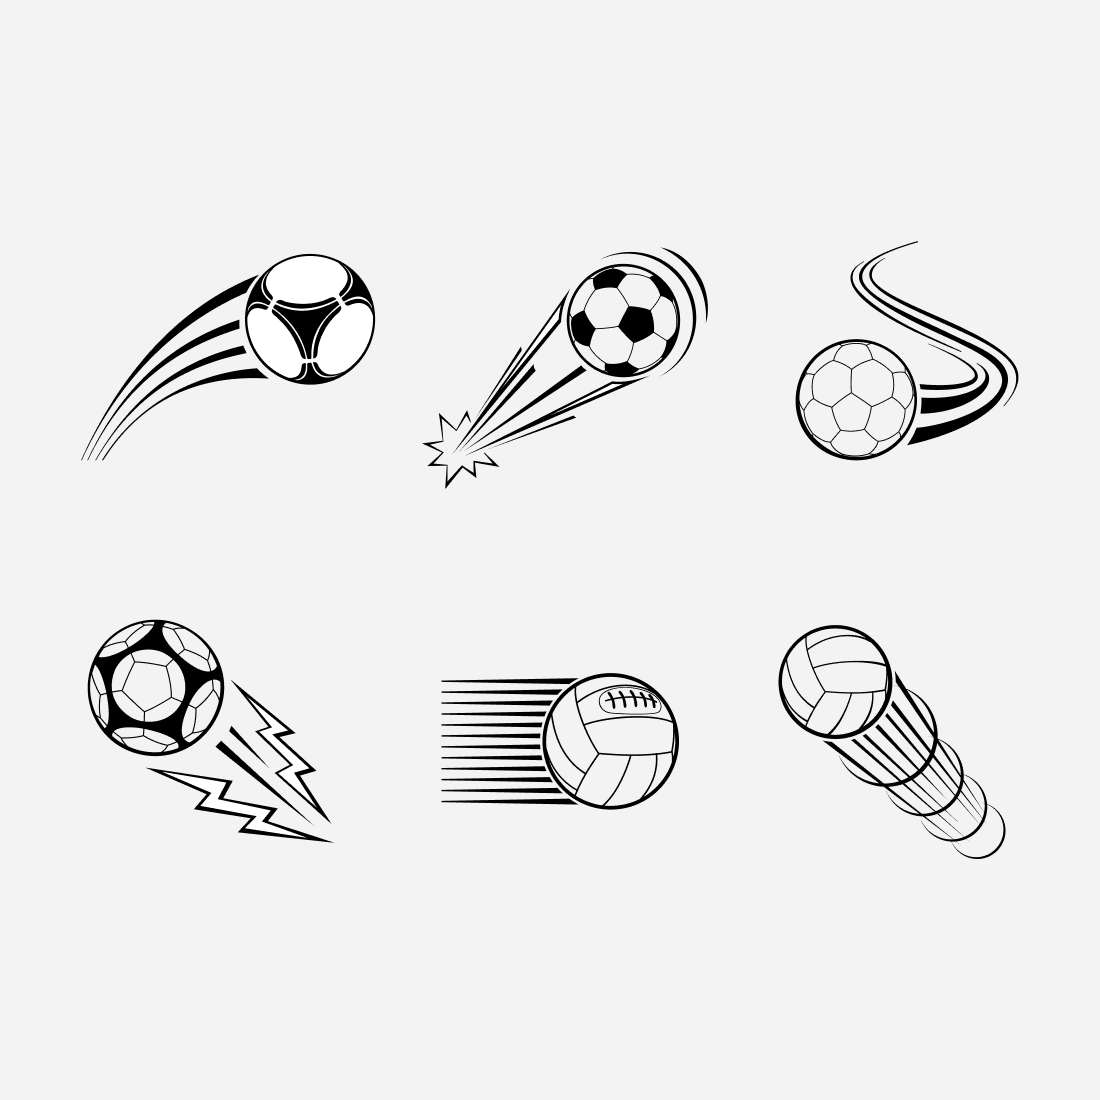 Soccer ball with different design in black and white.